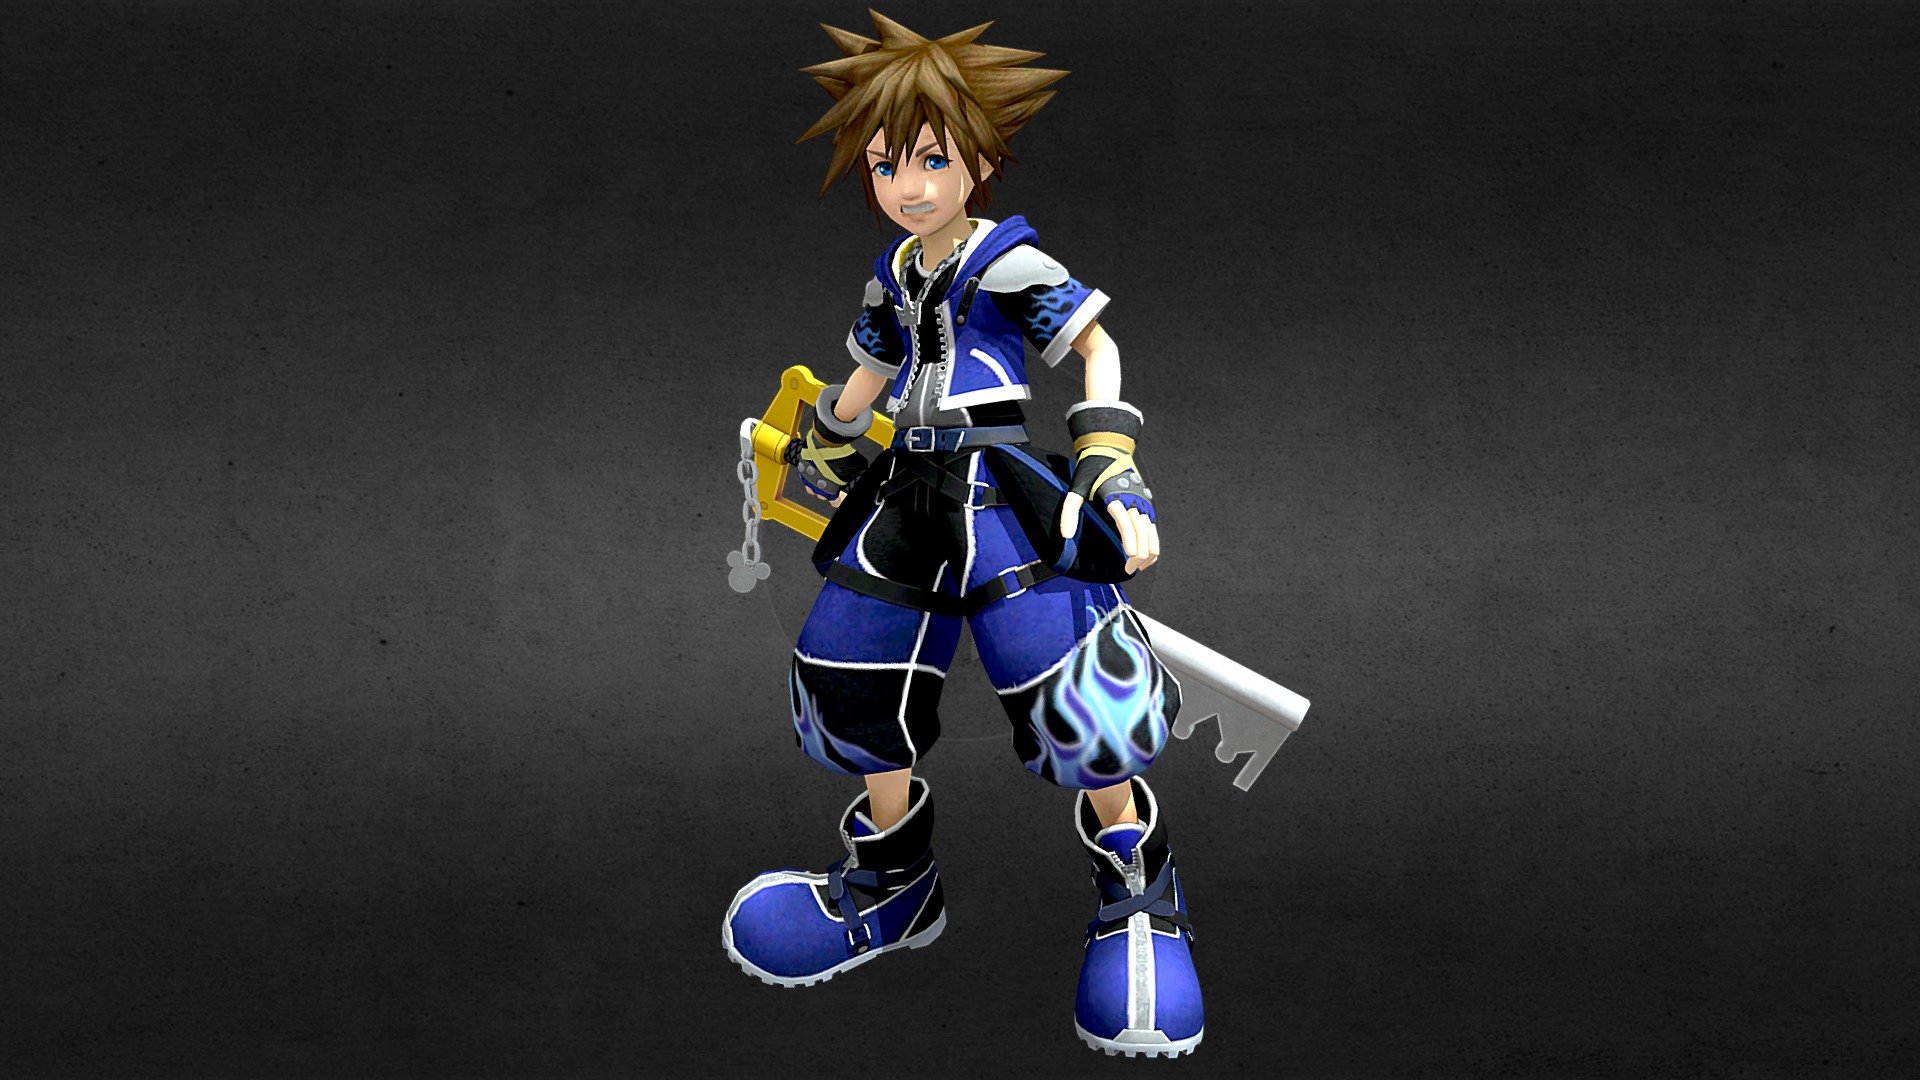 My recreation of Sora’s artwork for his Wisdom form from Kingdom Hearts 2

No you can’t DL this

I'd a appreciate if you gave this post a like, and that you follow me on sketchfab - Sora (Wisdom Form Art) SSBU Styled - 3D model by MG64 (@mariogamer64) 3d model